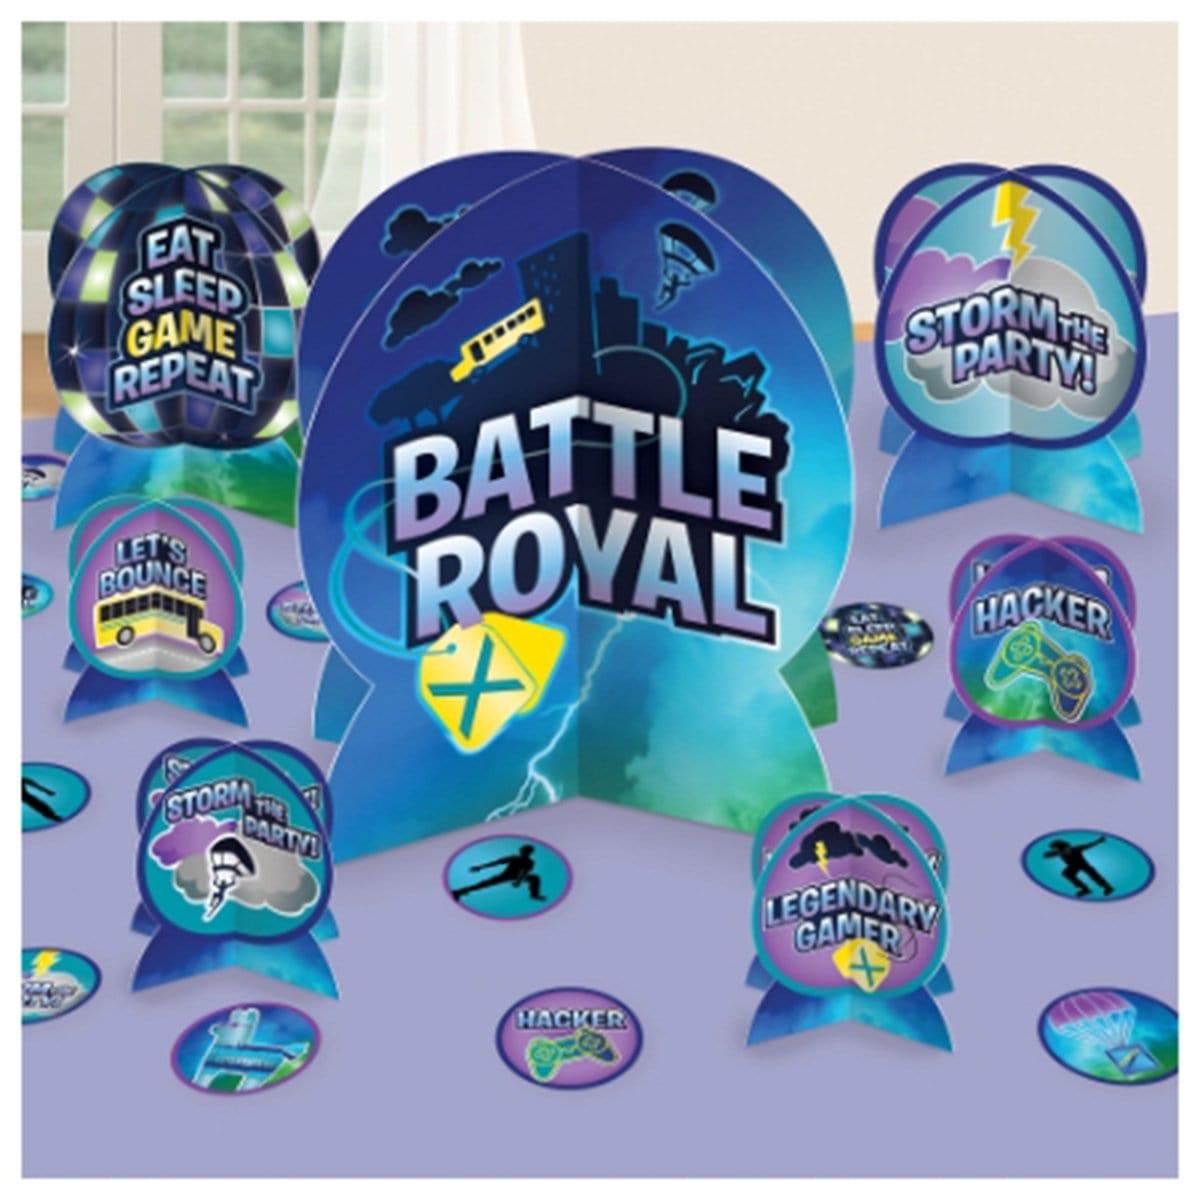 Buy Kids Birthday Fortnite Battle Royal table decorating kit sold at Party Expert